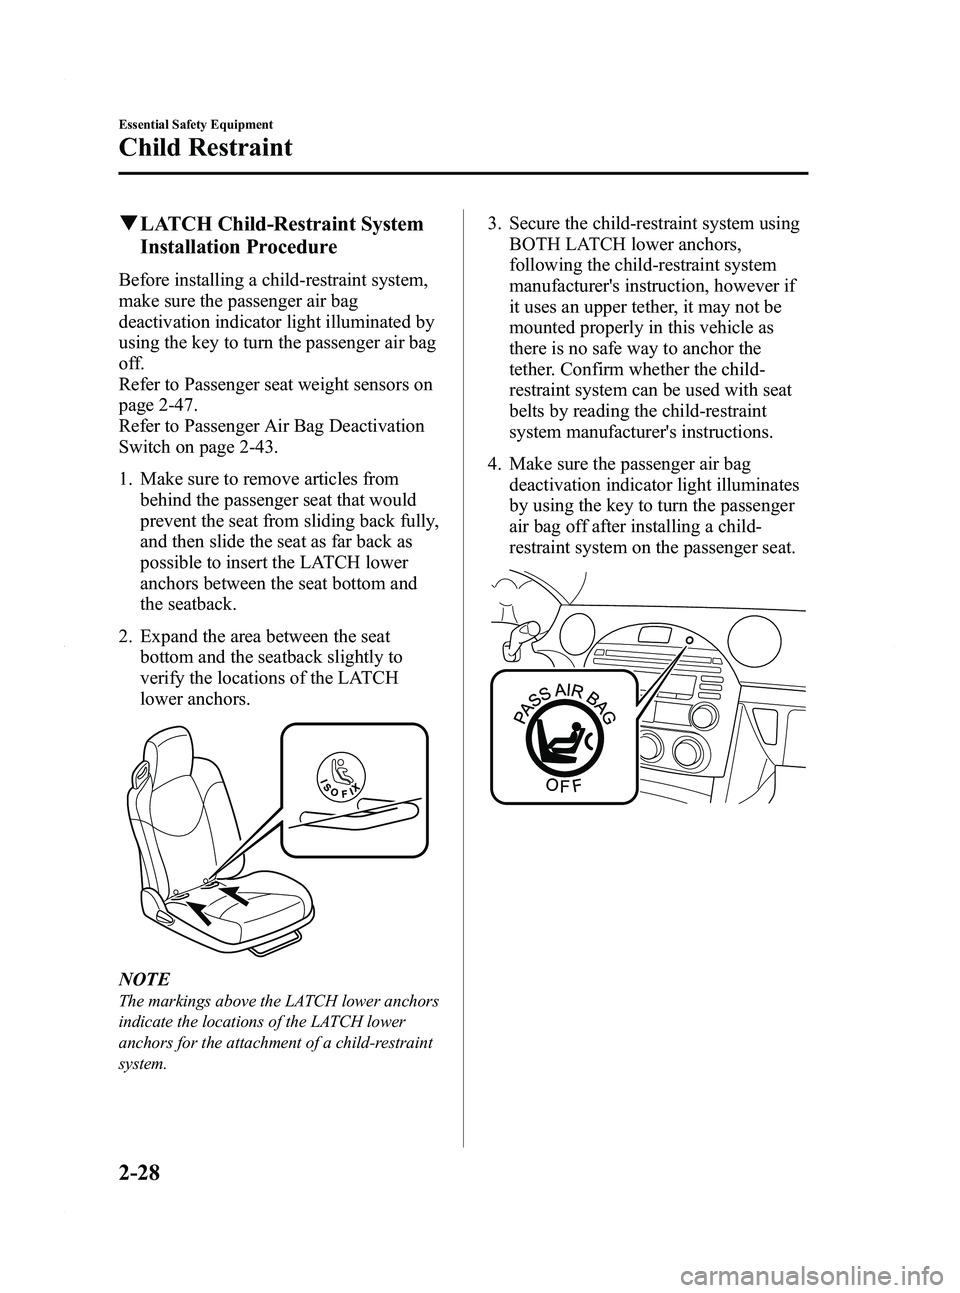 MAZDA MODEL MX-5 MIATA PRHT 2011  Owners Manual Black plate (40,1)
qLATCH Child-Restraint System
Installation Procedure
Before installing a child-restraint system,
make sure the passenger air bag
deactivation indicator light illuminated by
using th